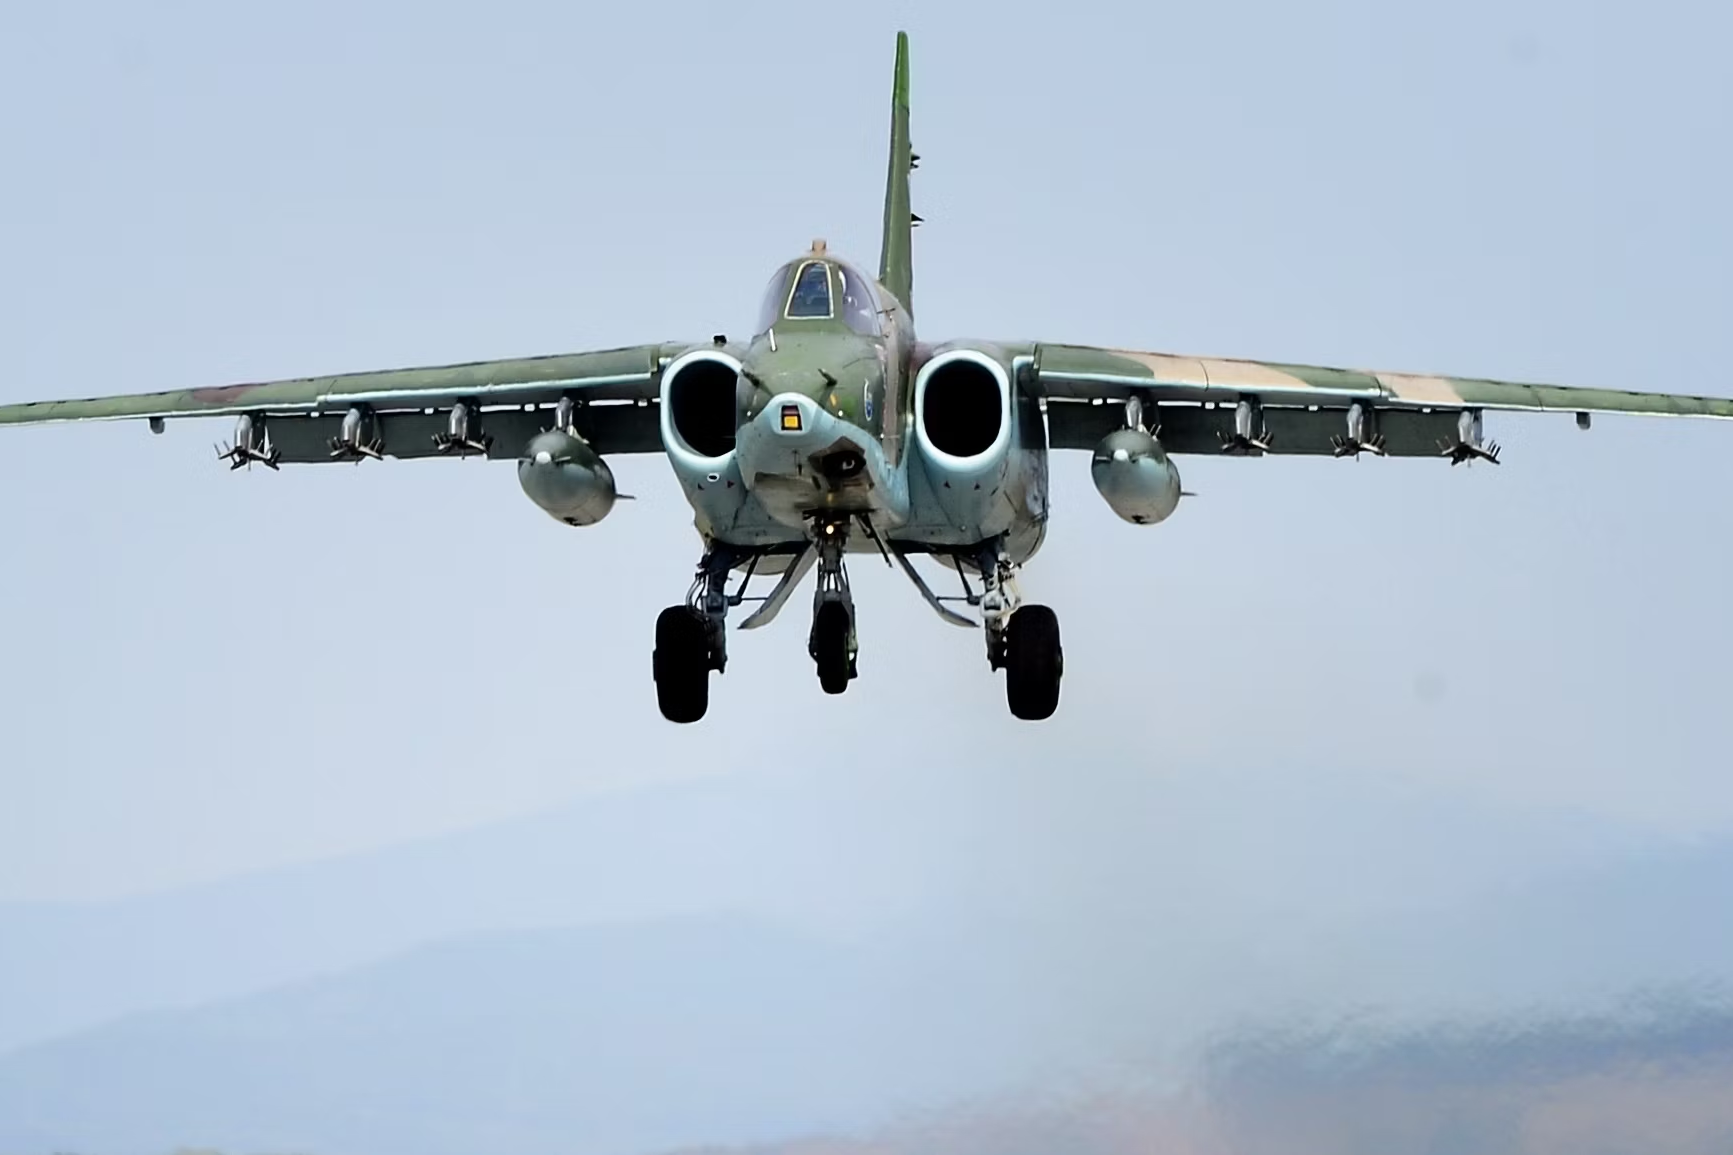 A Sukhoi SU-25 Frogfoot flying in the sky.